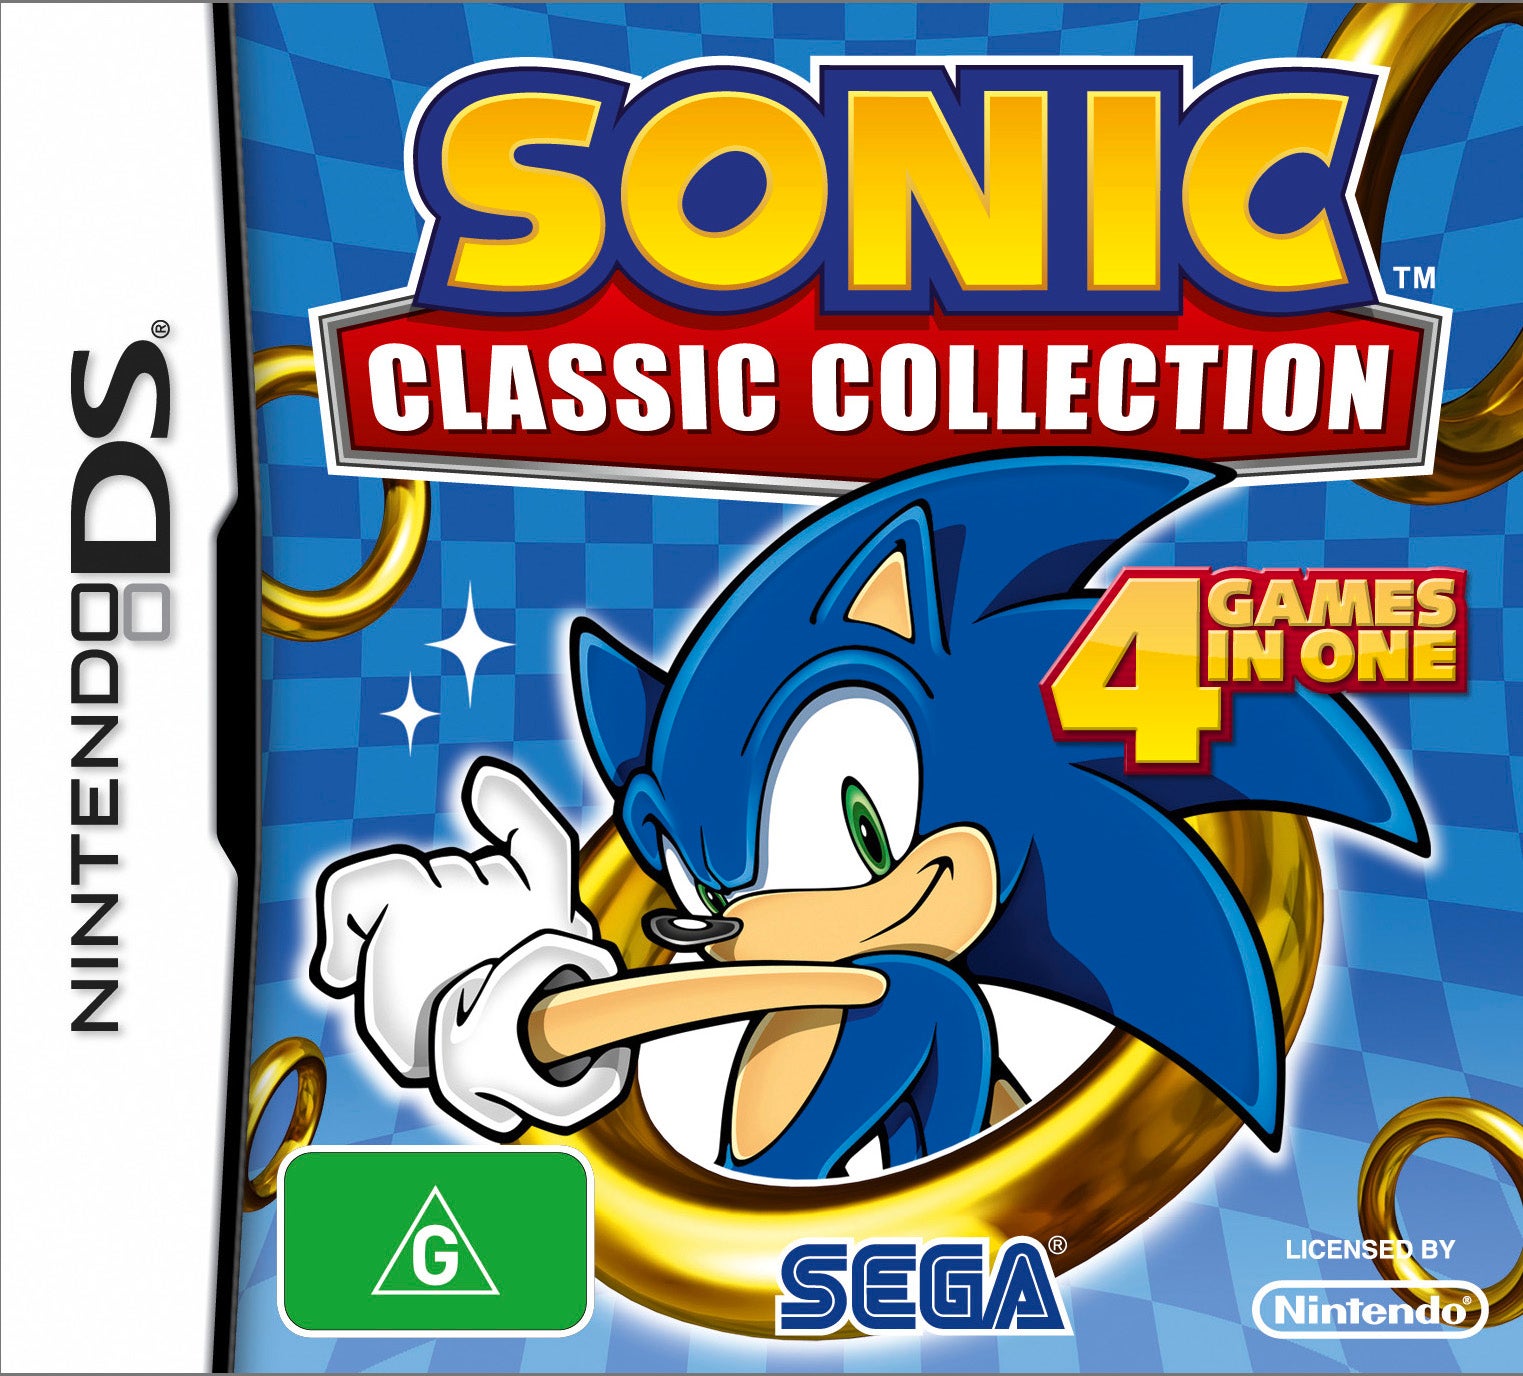 Sega Sonic Classic Collection Refurbished Nintendo DS Game